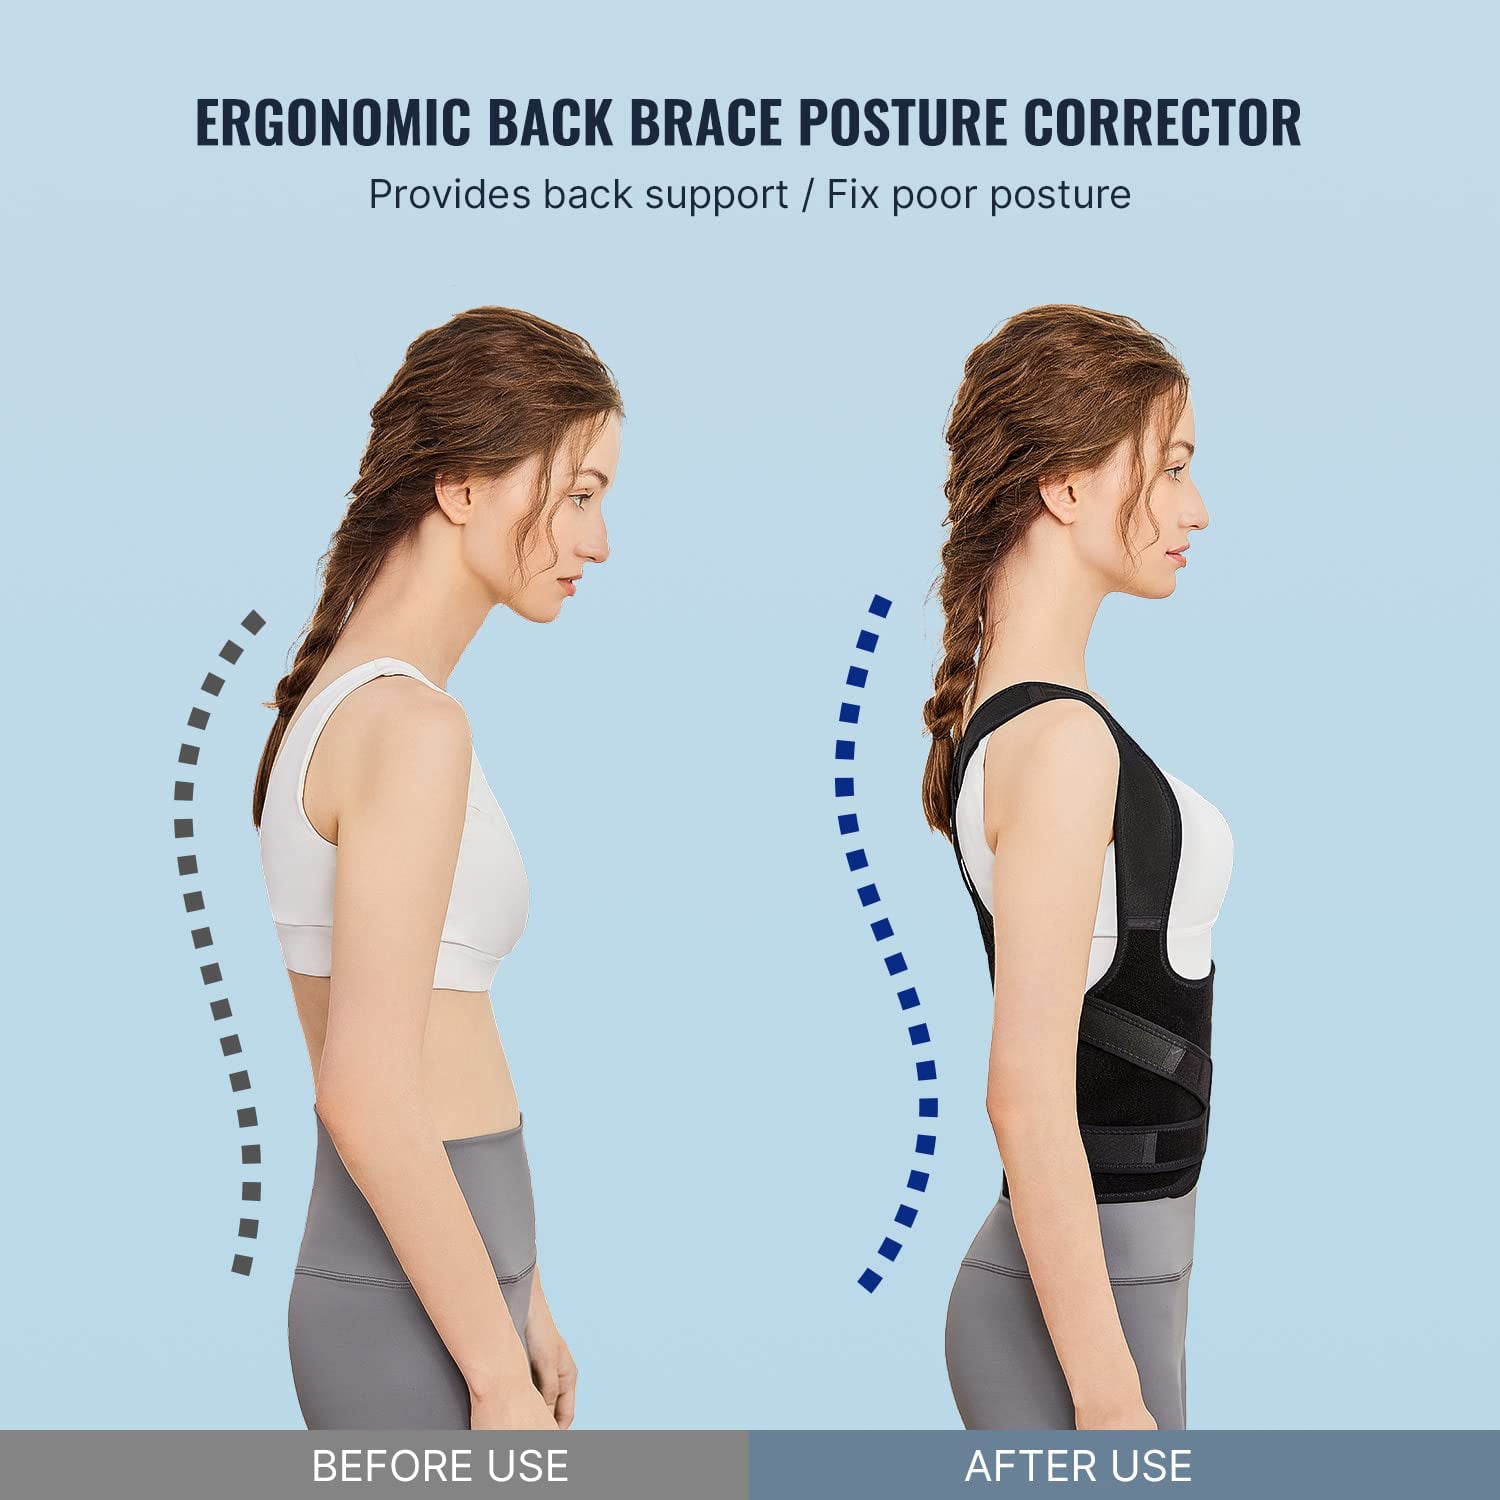 NEENCA Back Brace Posture Corrector for Women and Men – Neenca® Official  Store